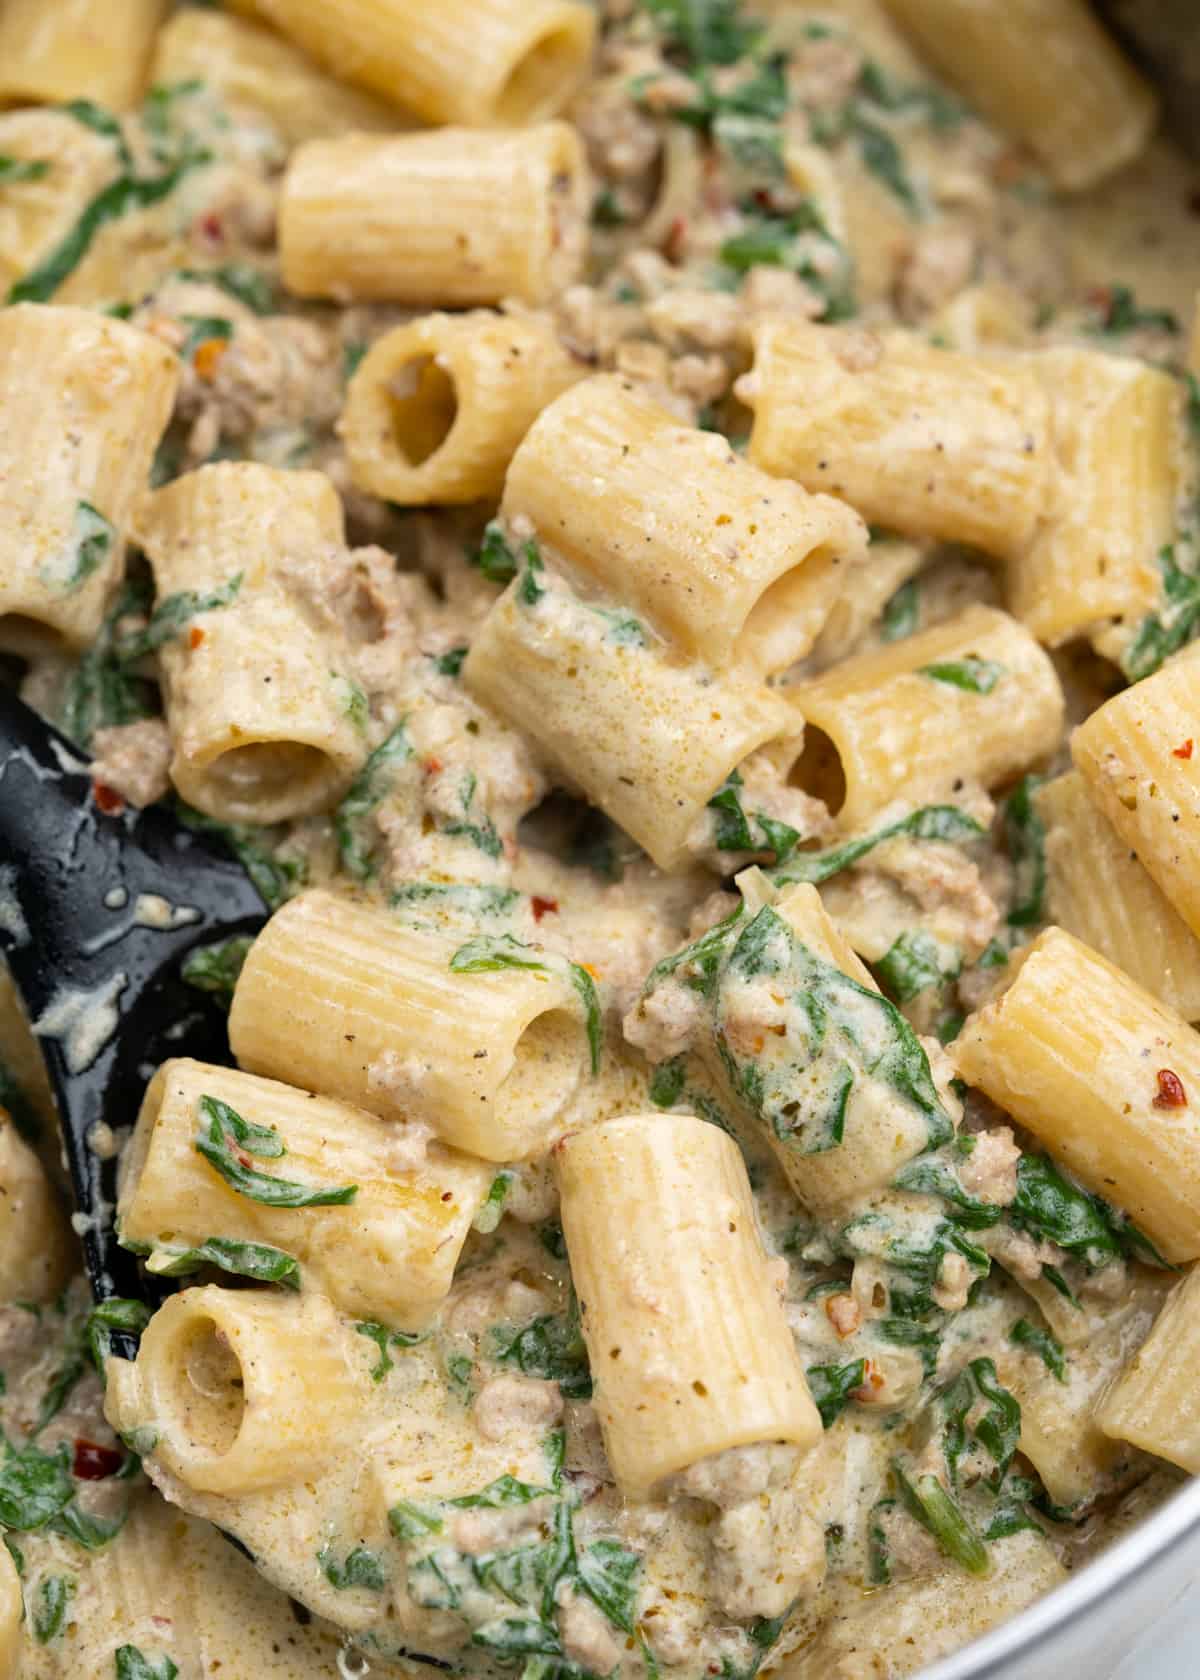 Rigatoni pasta in a creamy spinach and ground sausage sauce